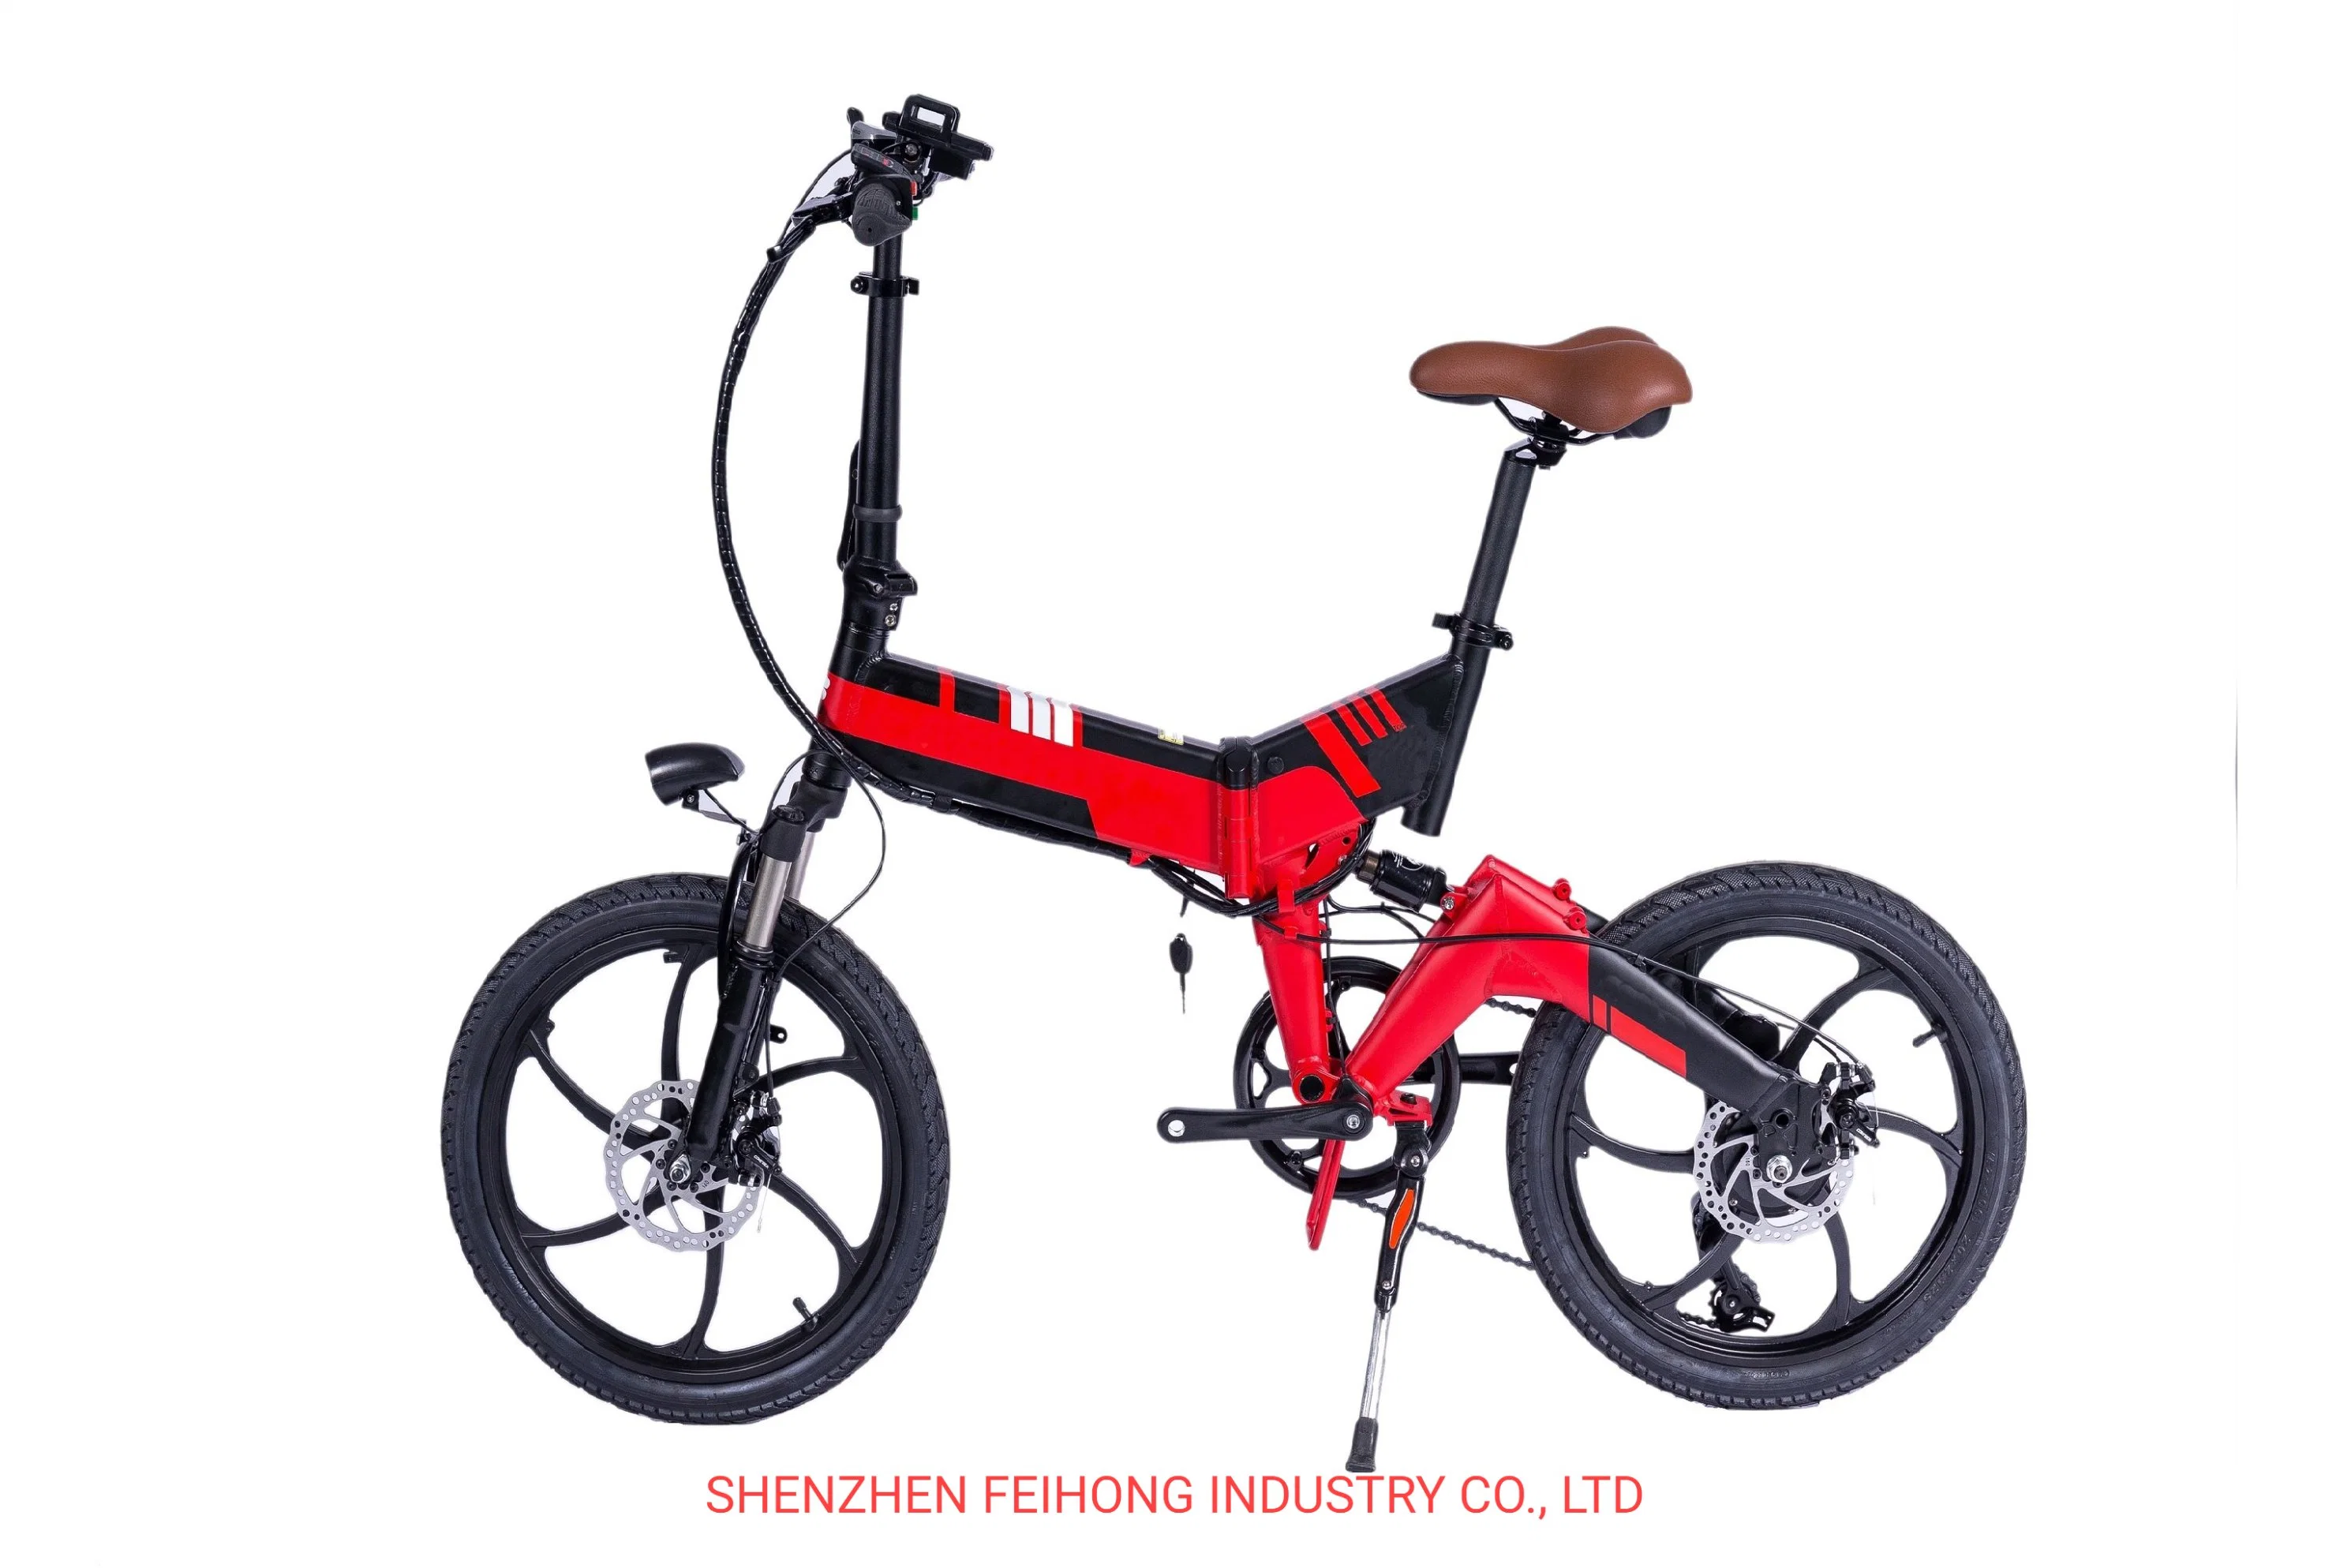 Motorcycle Electric Scooter Bicycle Electric Bike Electric Motorcycle Scooter Motor Scooter Duild in Battery Power Motor Aluminum Electric Hybrid Bike